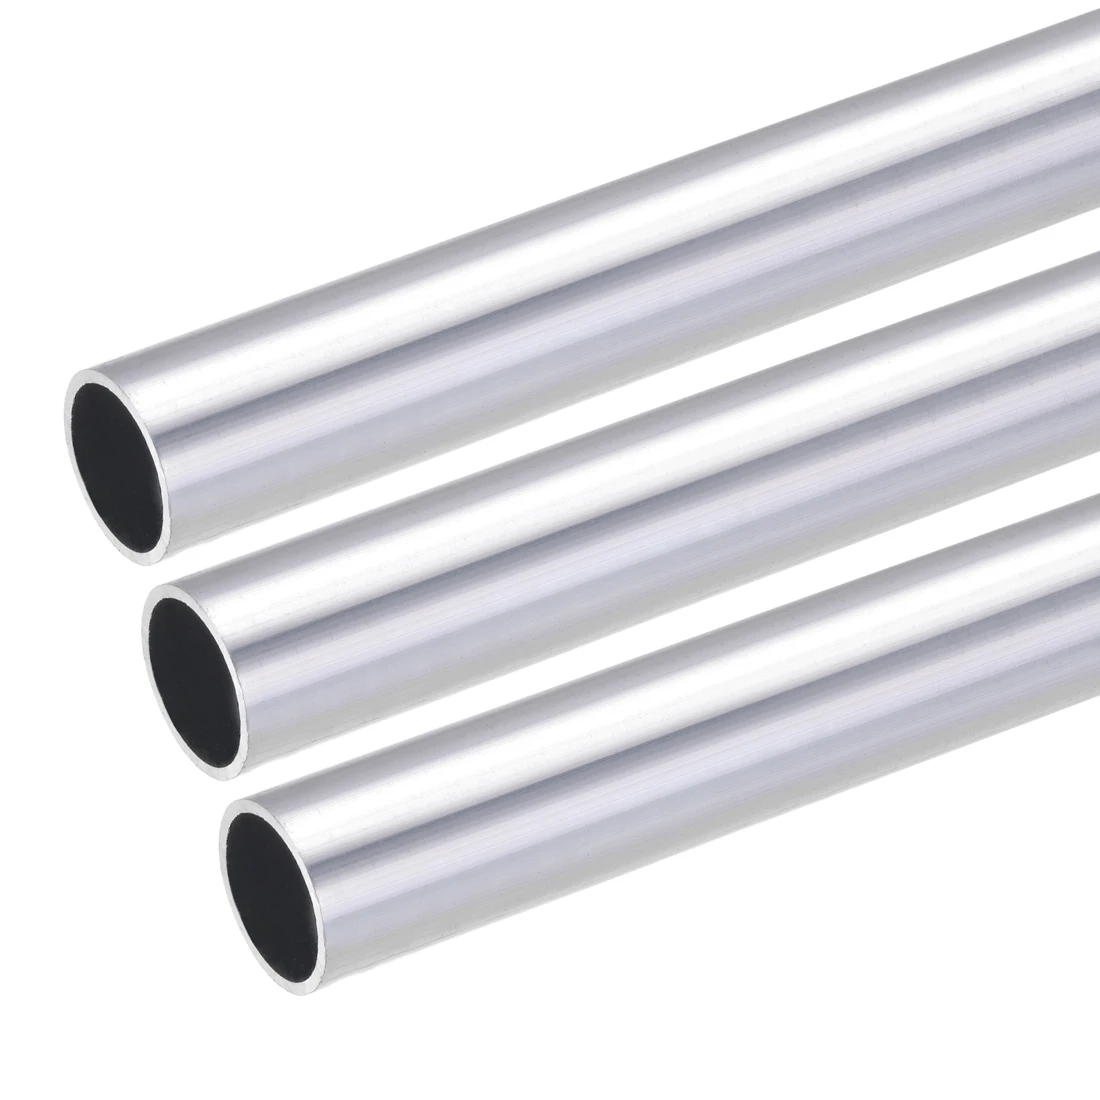 Details about   Aluminium alloy round hollow Bar 300mm Length tubing 14 Diameters Pipe Rod 